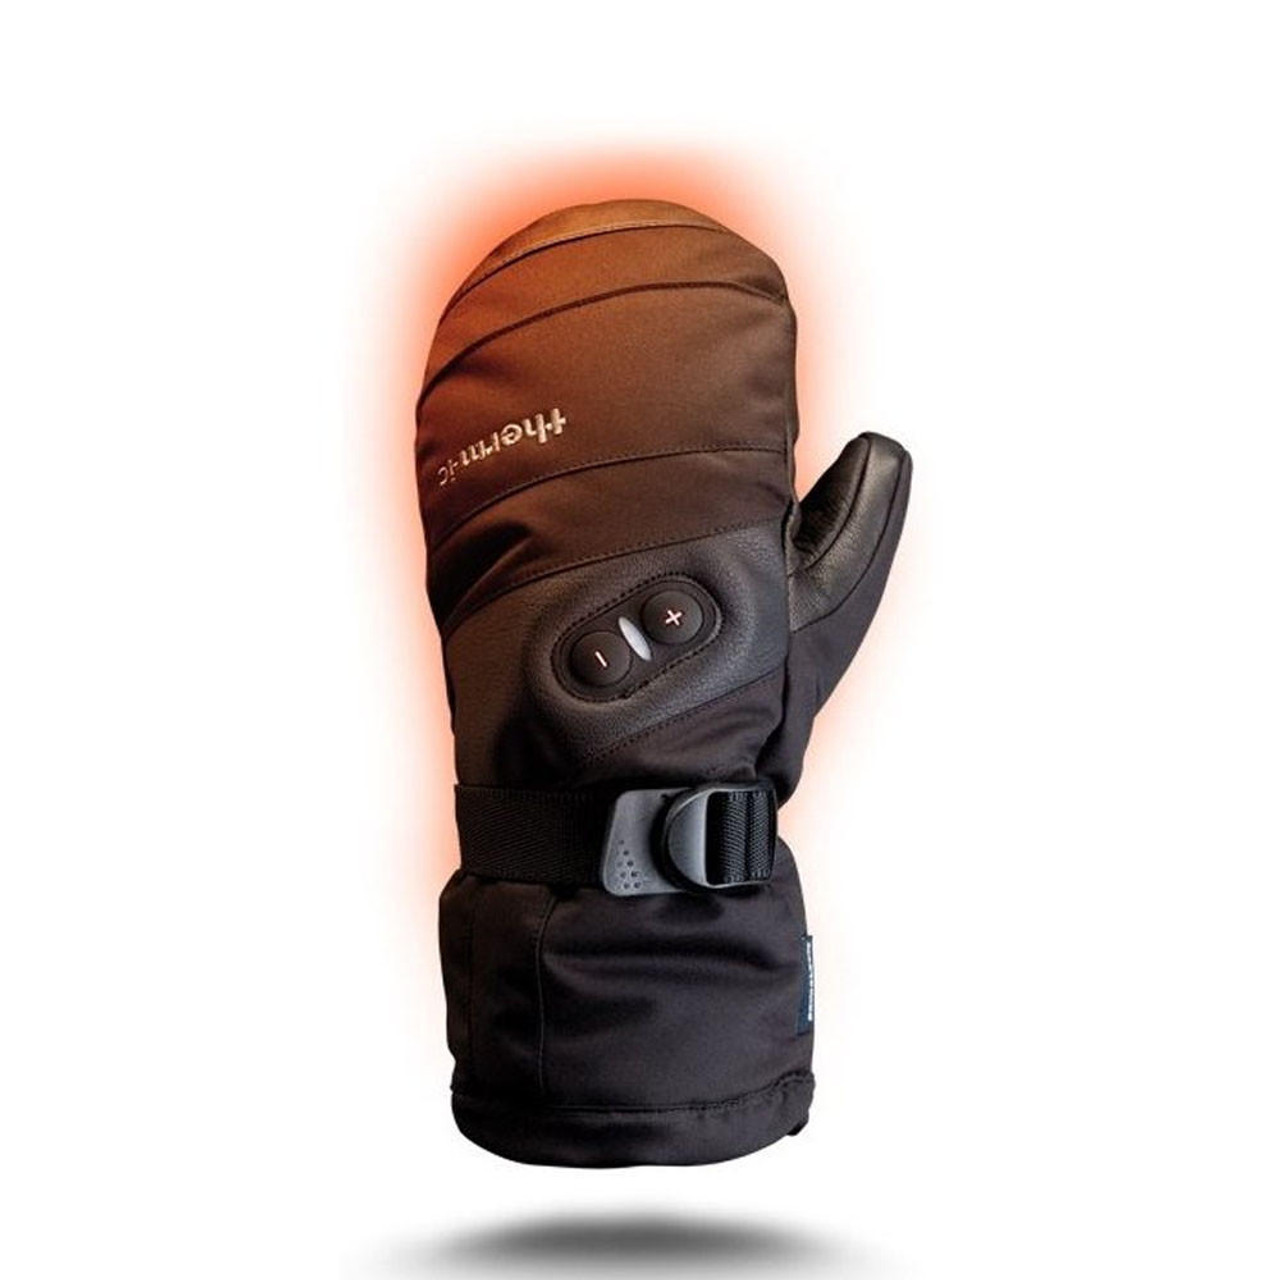 https://cdn11.bigcommerce.com/s-186hk/images/stencil/1280x1280/products/85614/143886/therm-ic-therm-ic-powergloves-ic1300-mitts__06990.1690389291.jpg?c=2?imbypass=on